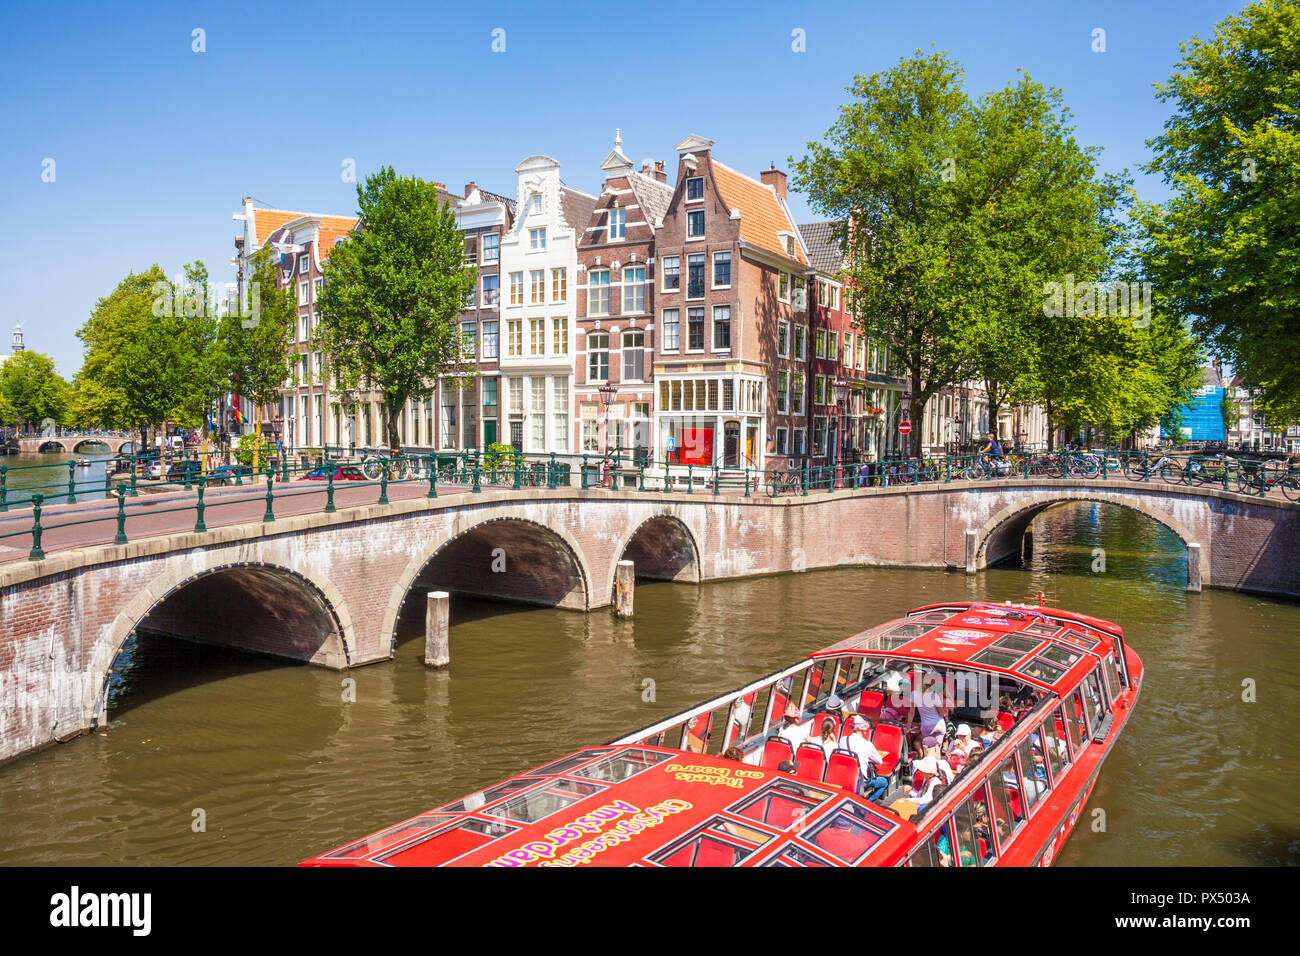 Amsterdam canal boat going under the bridges of Leidsegracht canal at the junction with Keizergracht canal Amsterdam Netherlands Holland EU Europe Stock Photo